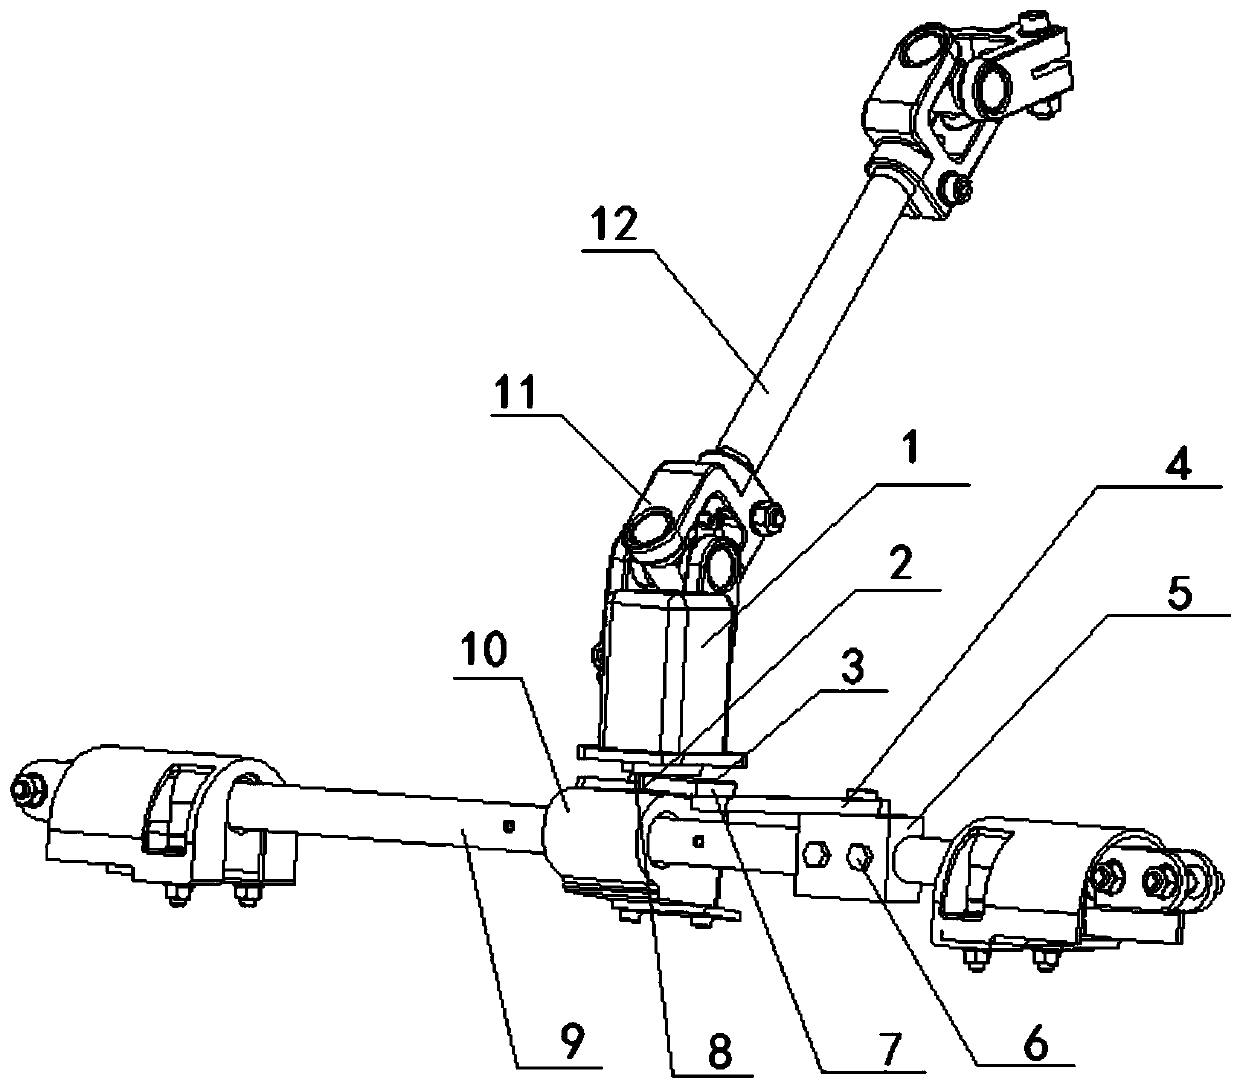 Freely switchable unmanned formula car steering mechanism